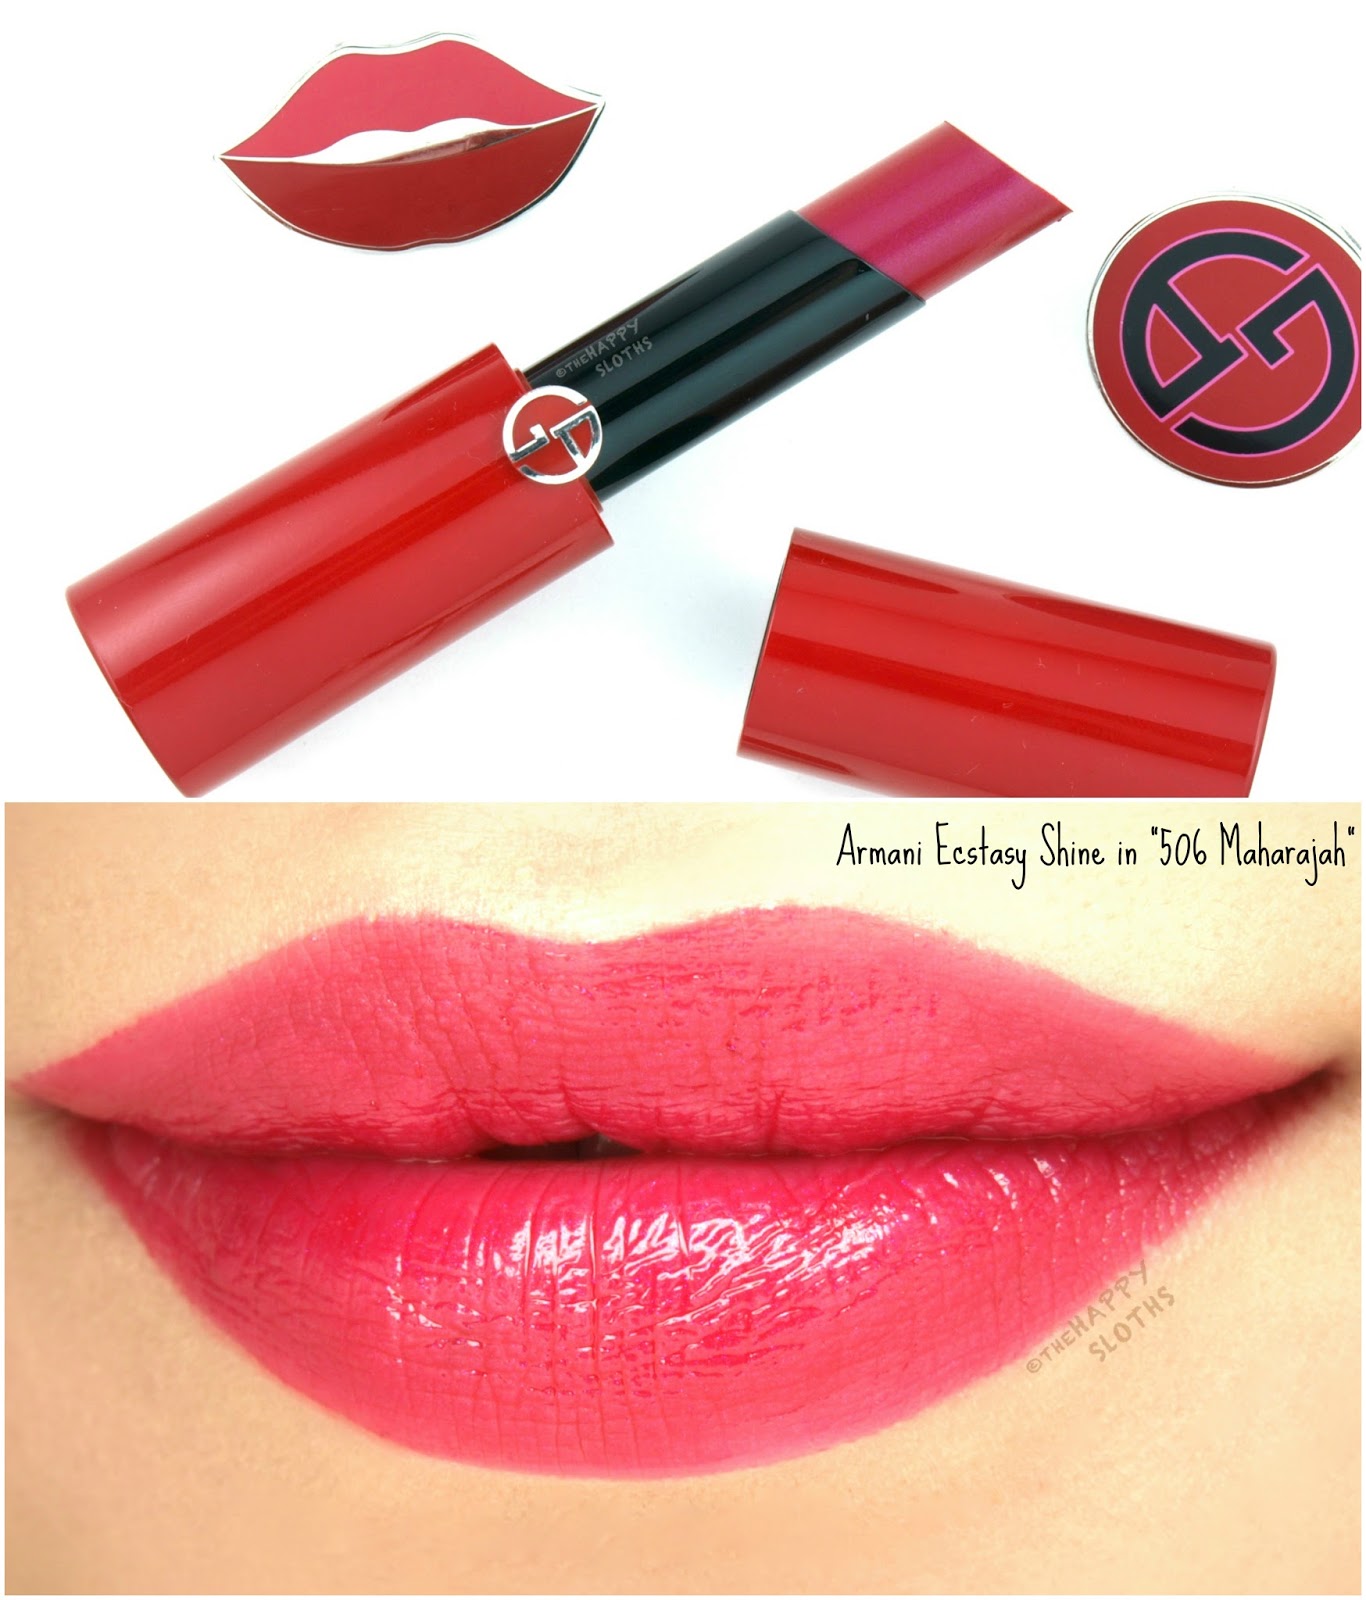 Giorgio Armani Beauty Ecstasy Shine Lipstick in "506 Maharajah": Review and Swatches